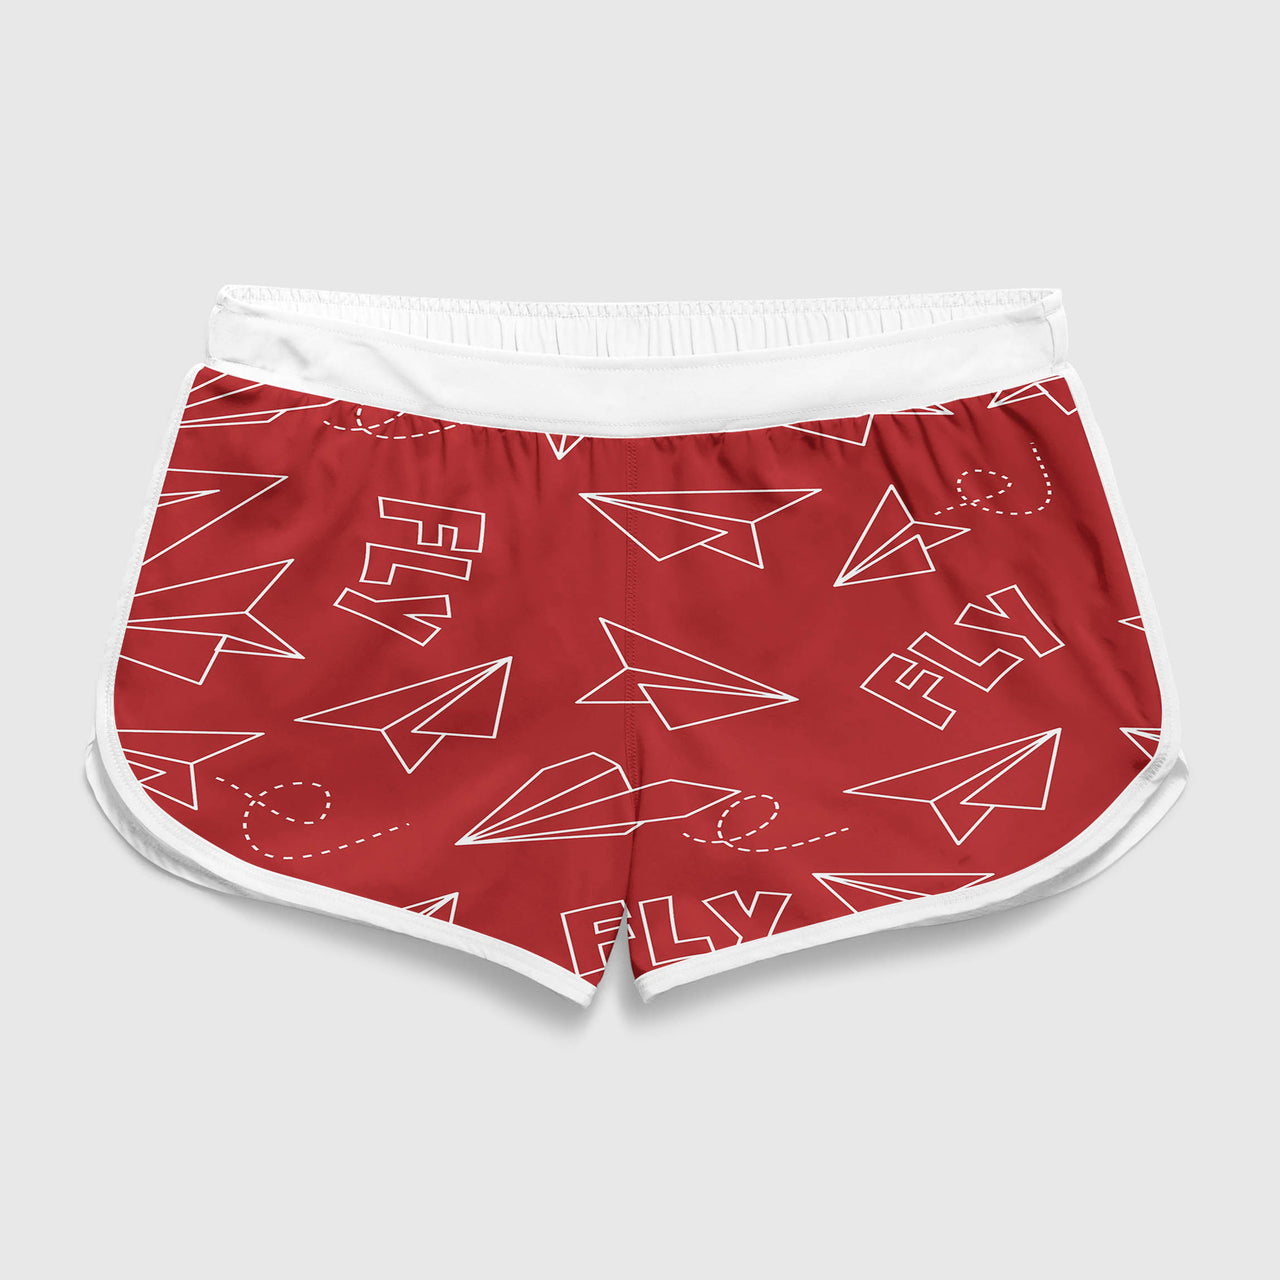 Travelling with Aircraft (Red) Designed Women Beach Style Shorts